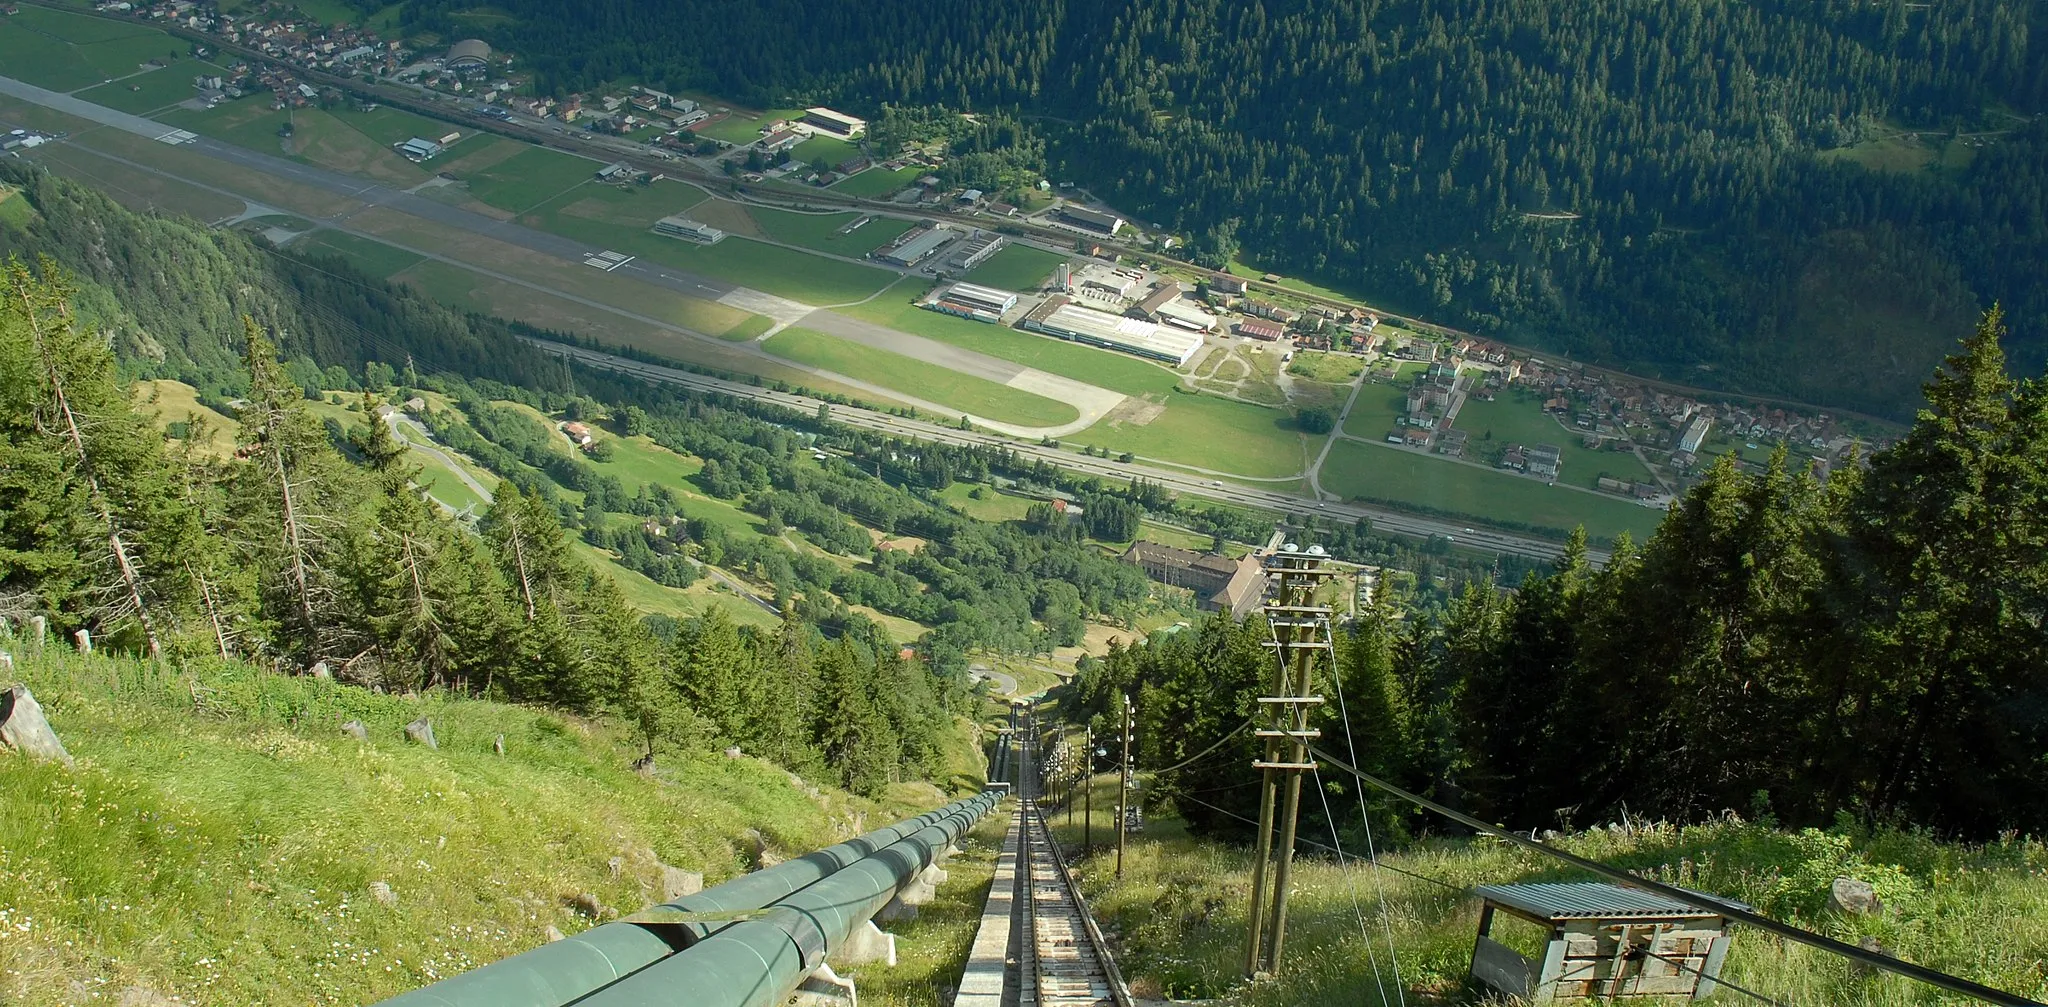 Photo showing: View down the Ritom funicular in the Swiss canton of Ticino. Ambri Airport can be seen at the bottom of the valley. For more information, see the Wikipedia articles Ritom funicular and Ambri Airport.